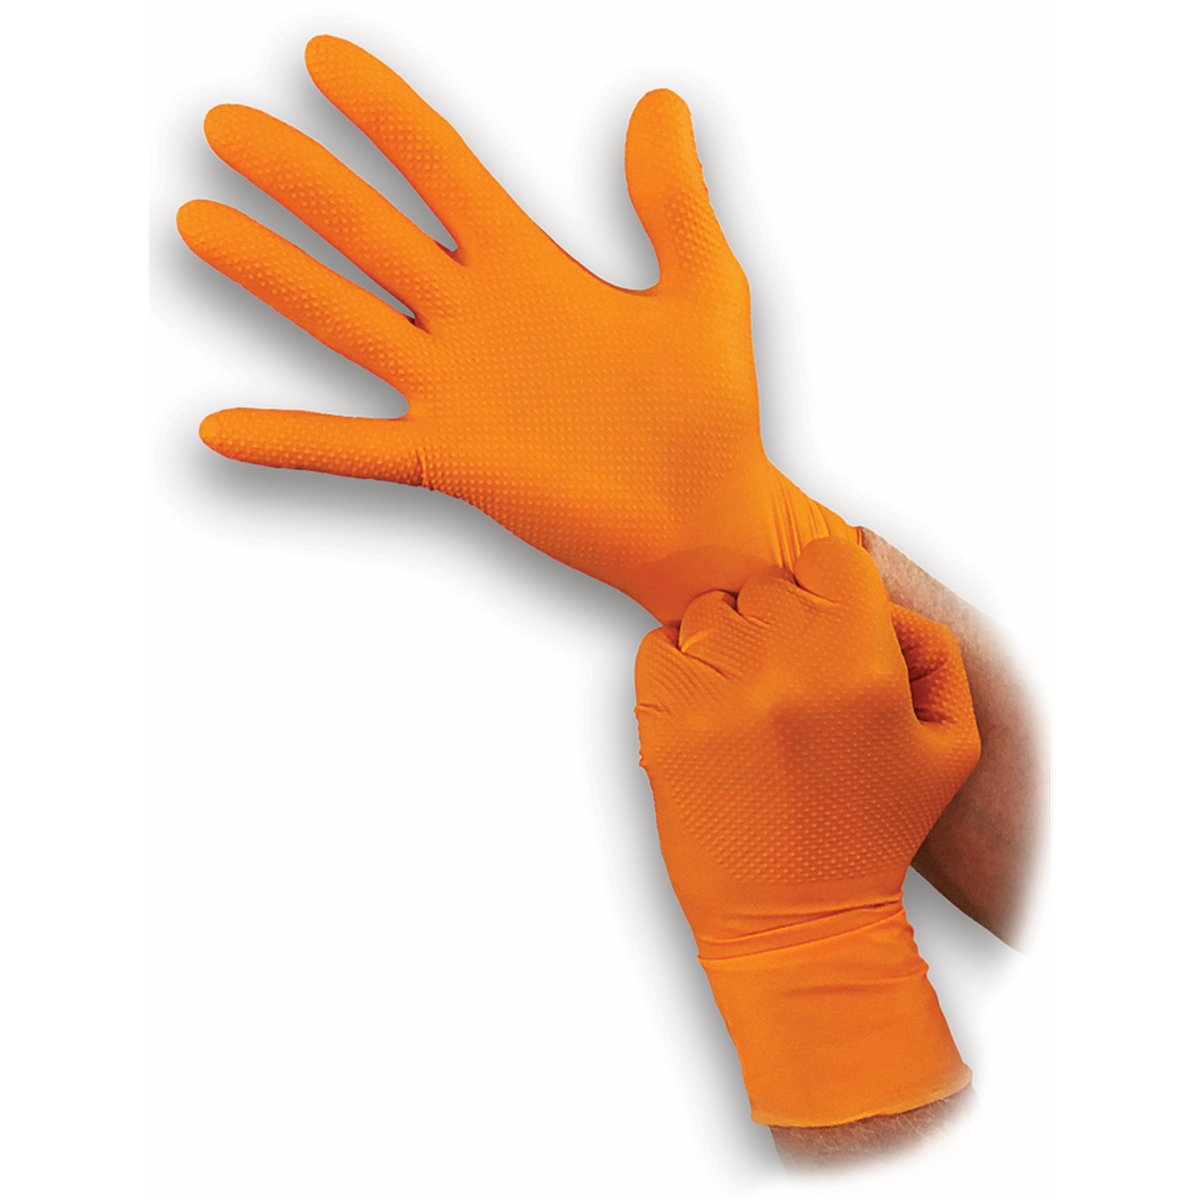 Picture of Atlantic Safety Products BLGOO-L Super Tough 8 Mil Powder Free Nitrile Disposable Gloves with Aggressive Diamond Grip, Orange - Large - 100 per Box